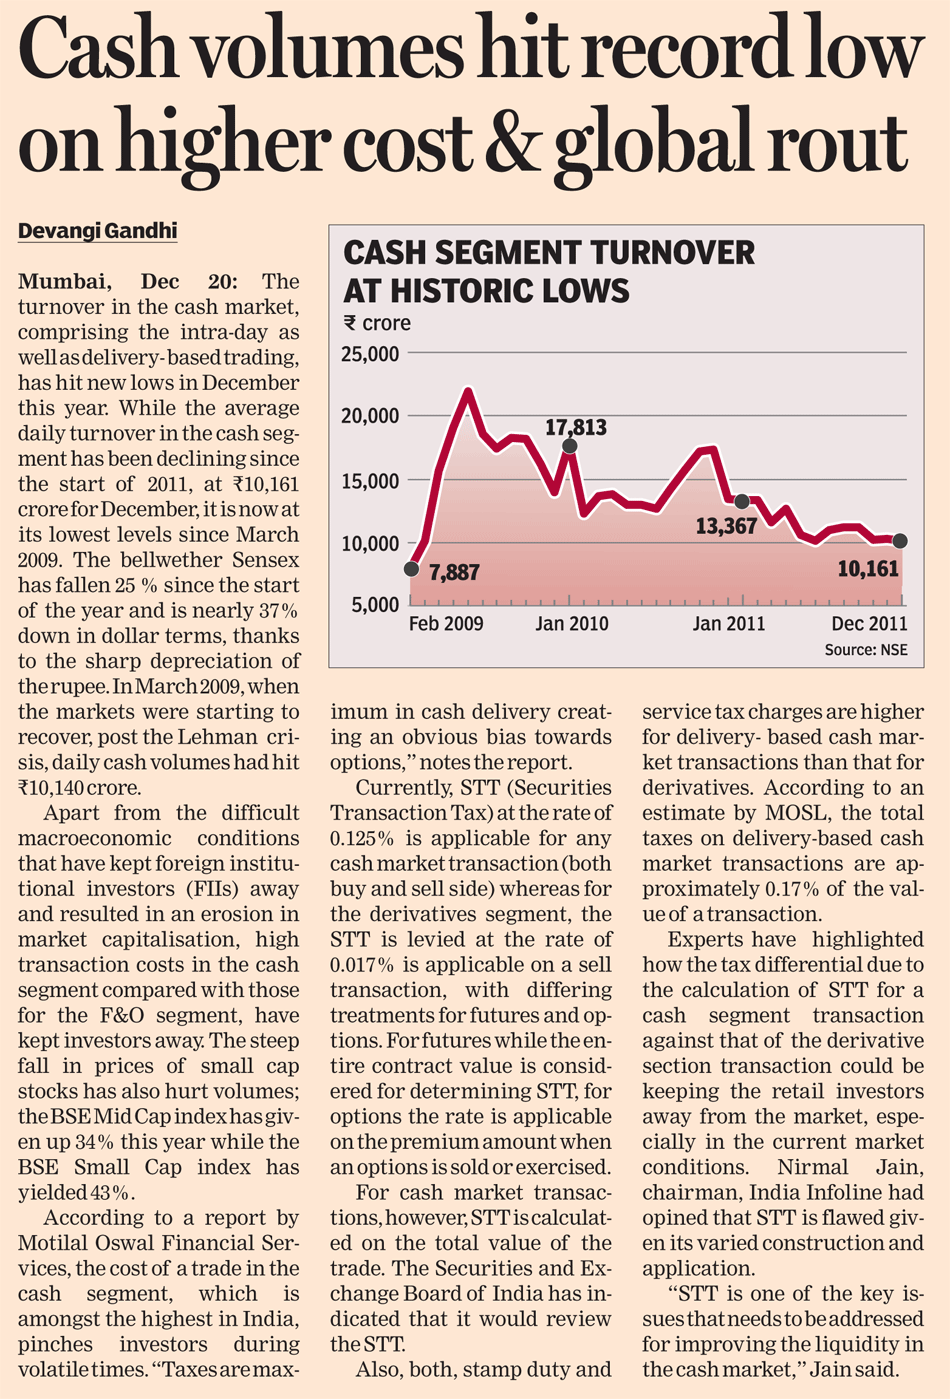 Cash volumes hit record low on higher cost & global rout